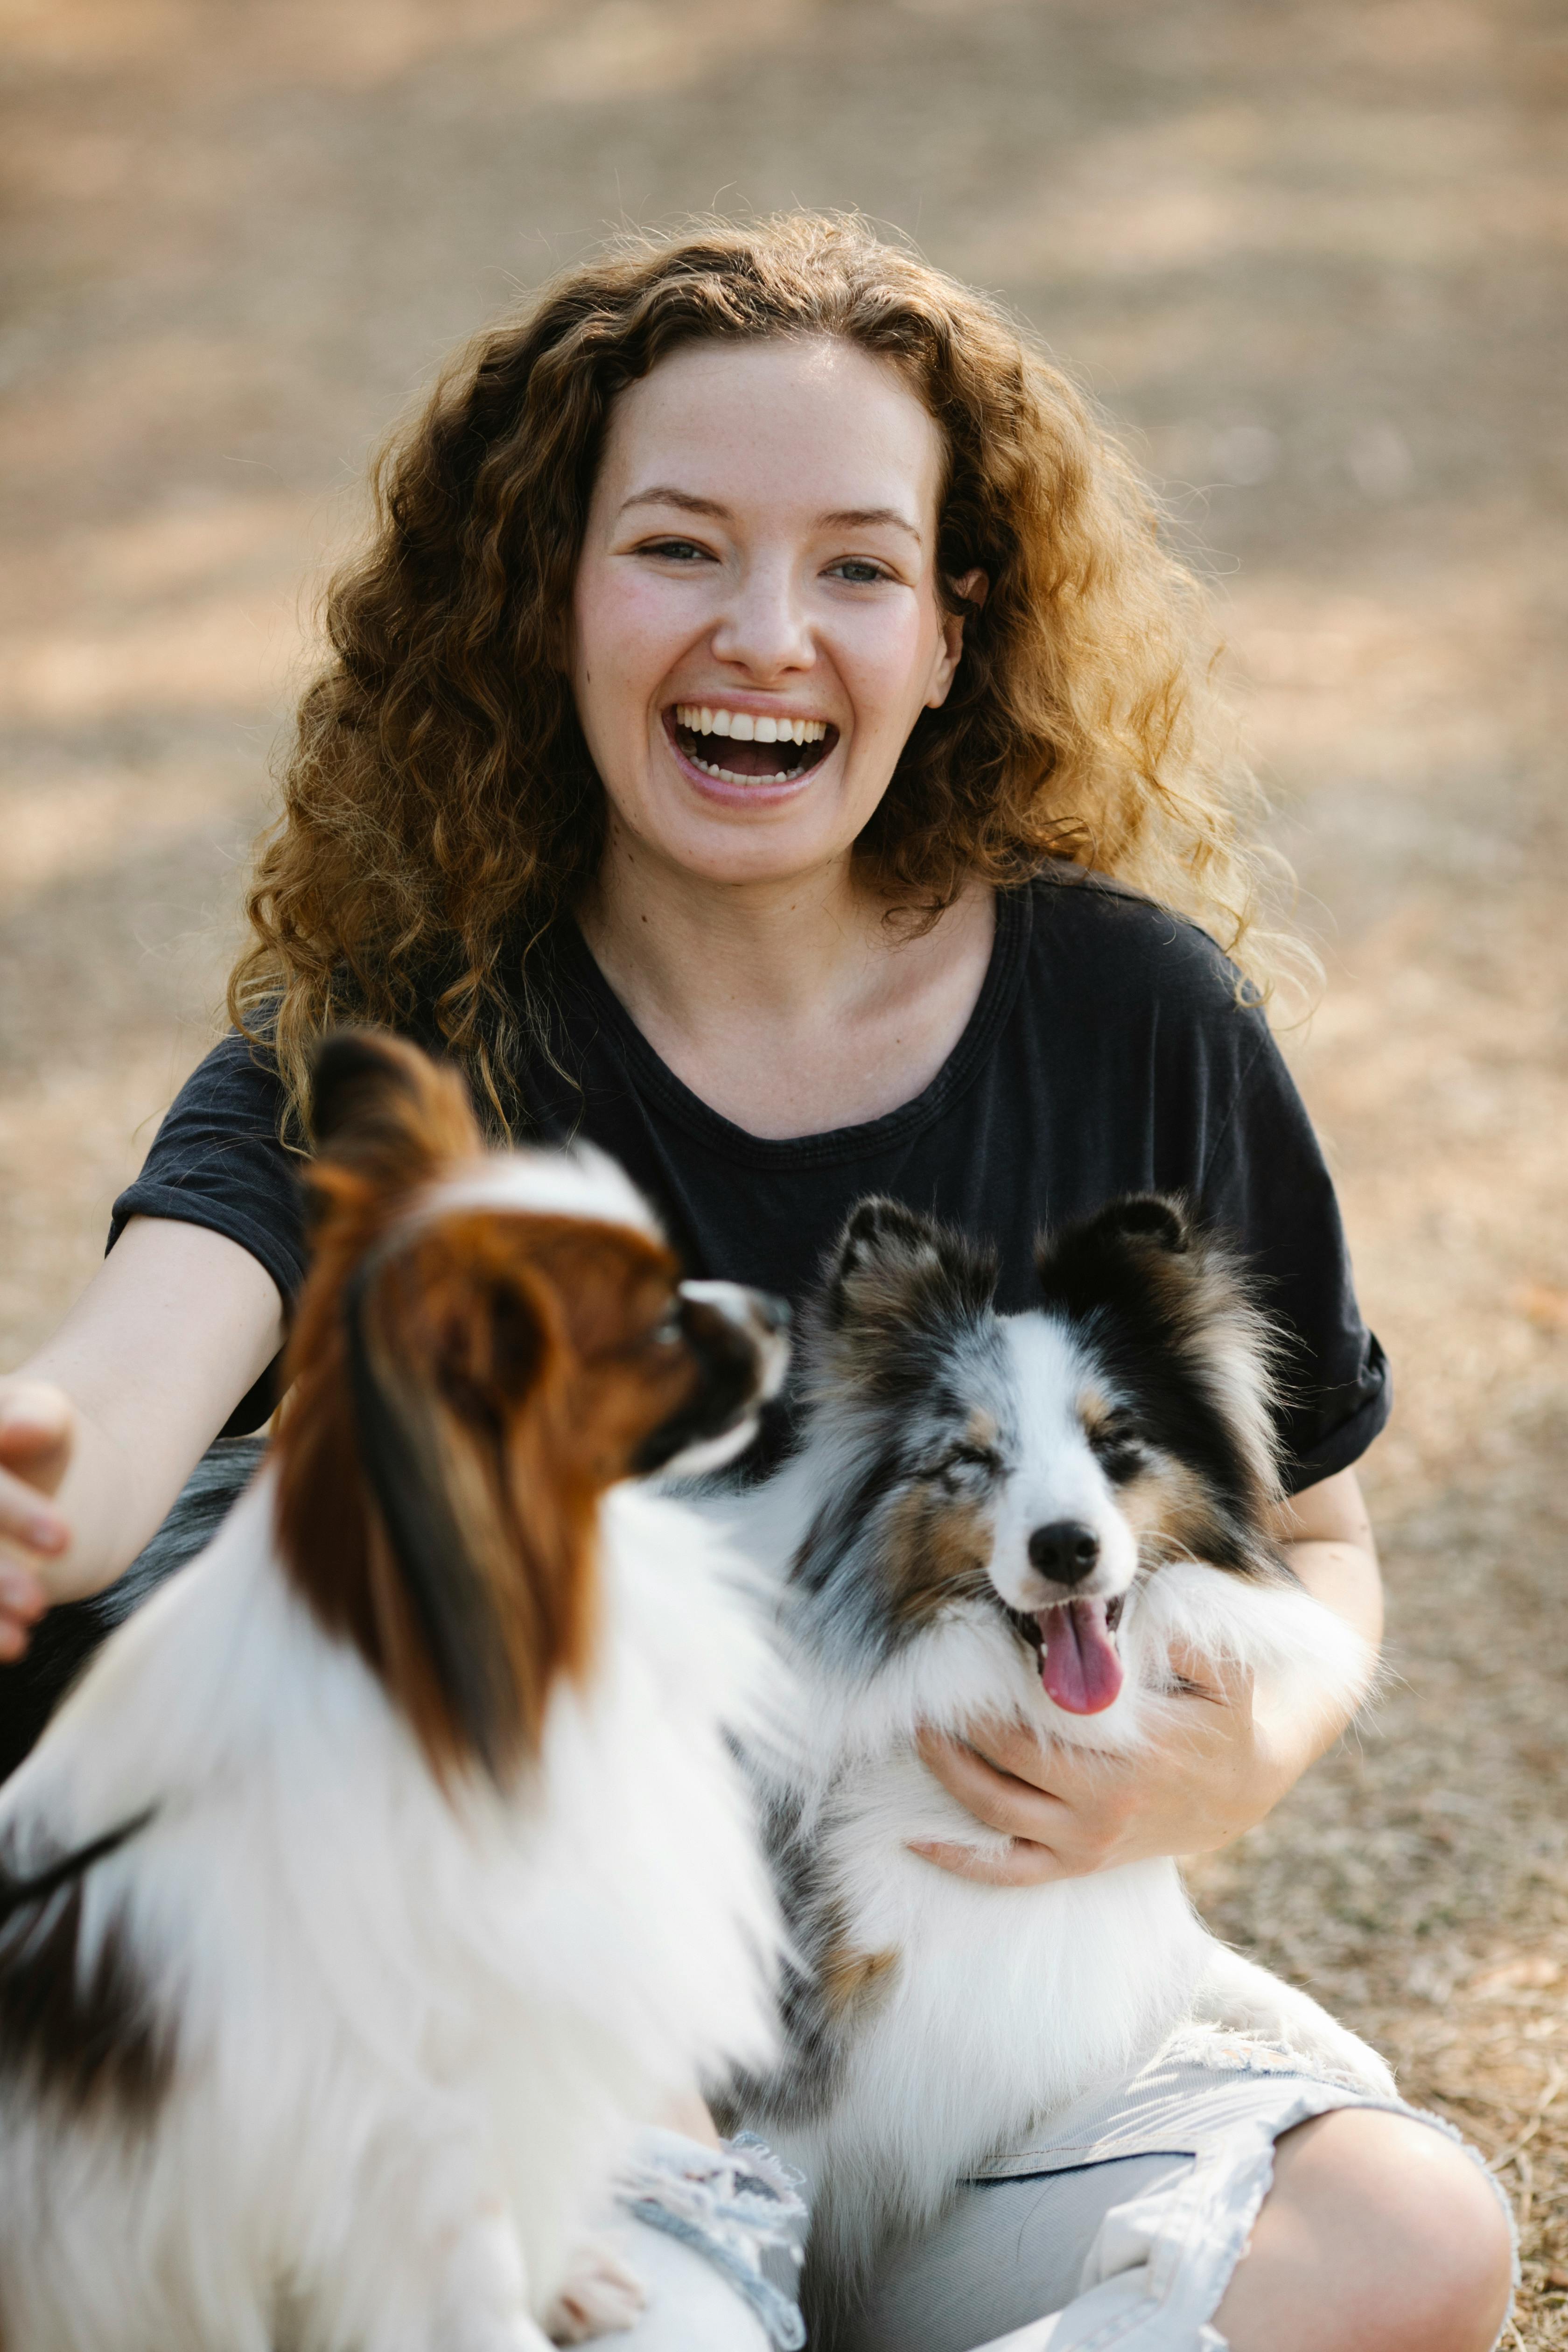 A woman with her dogs | Source: Pexels